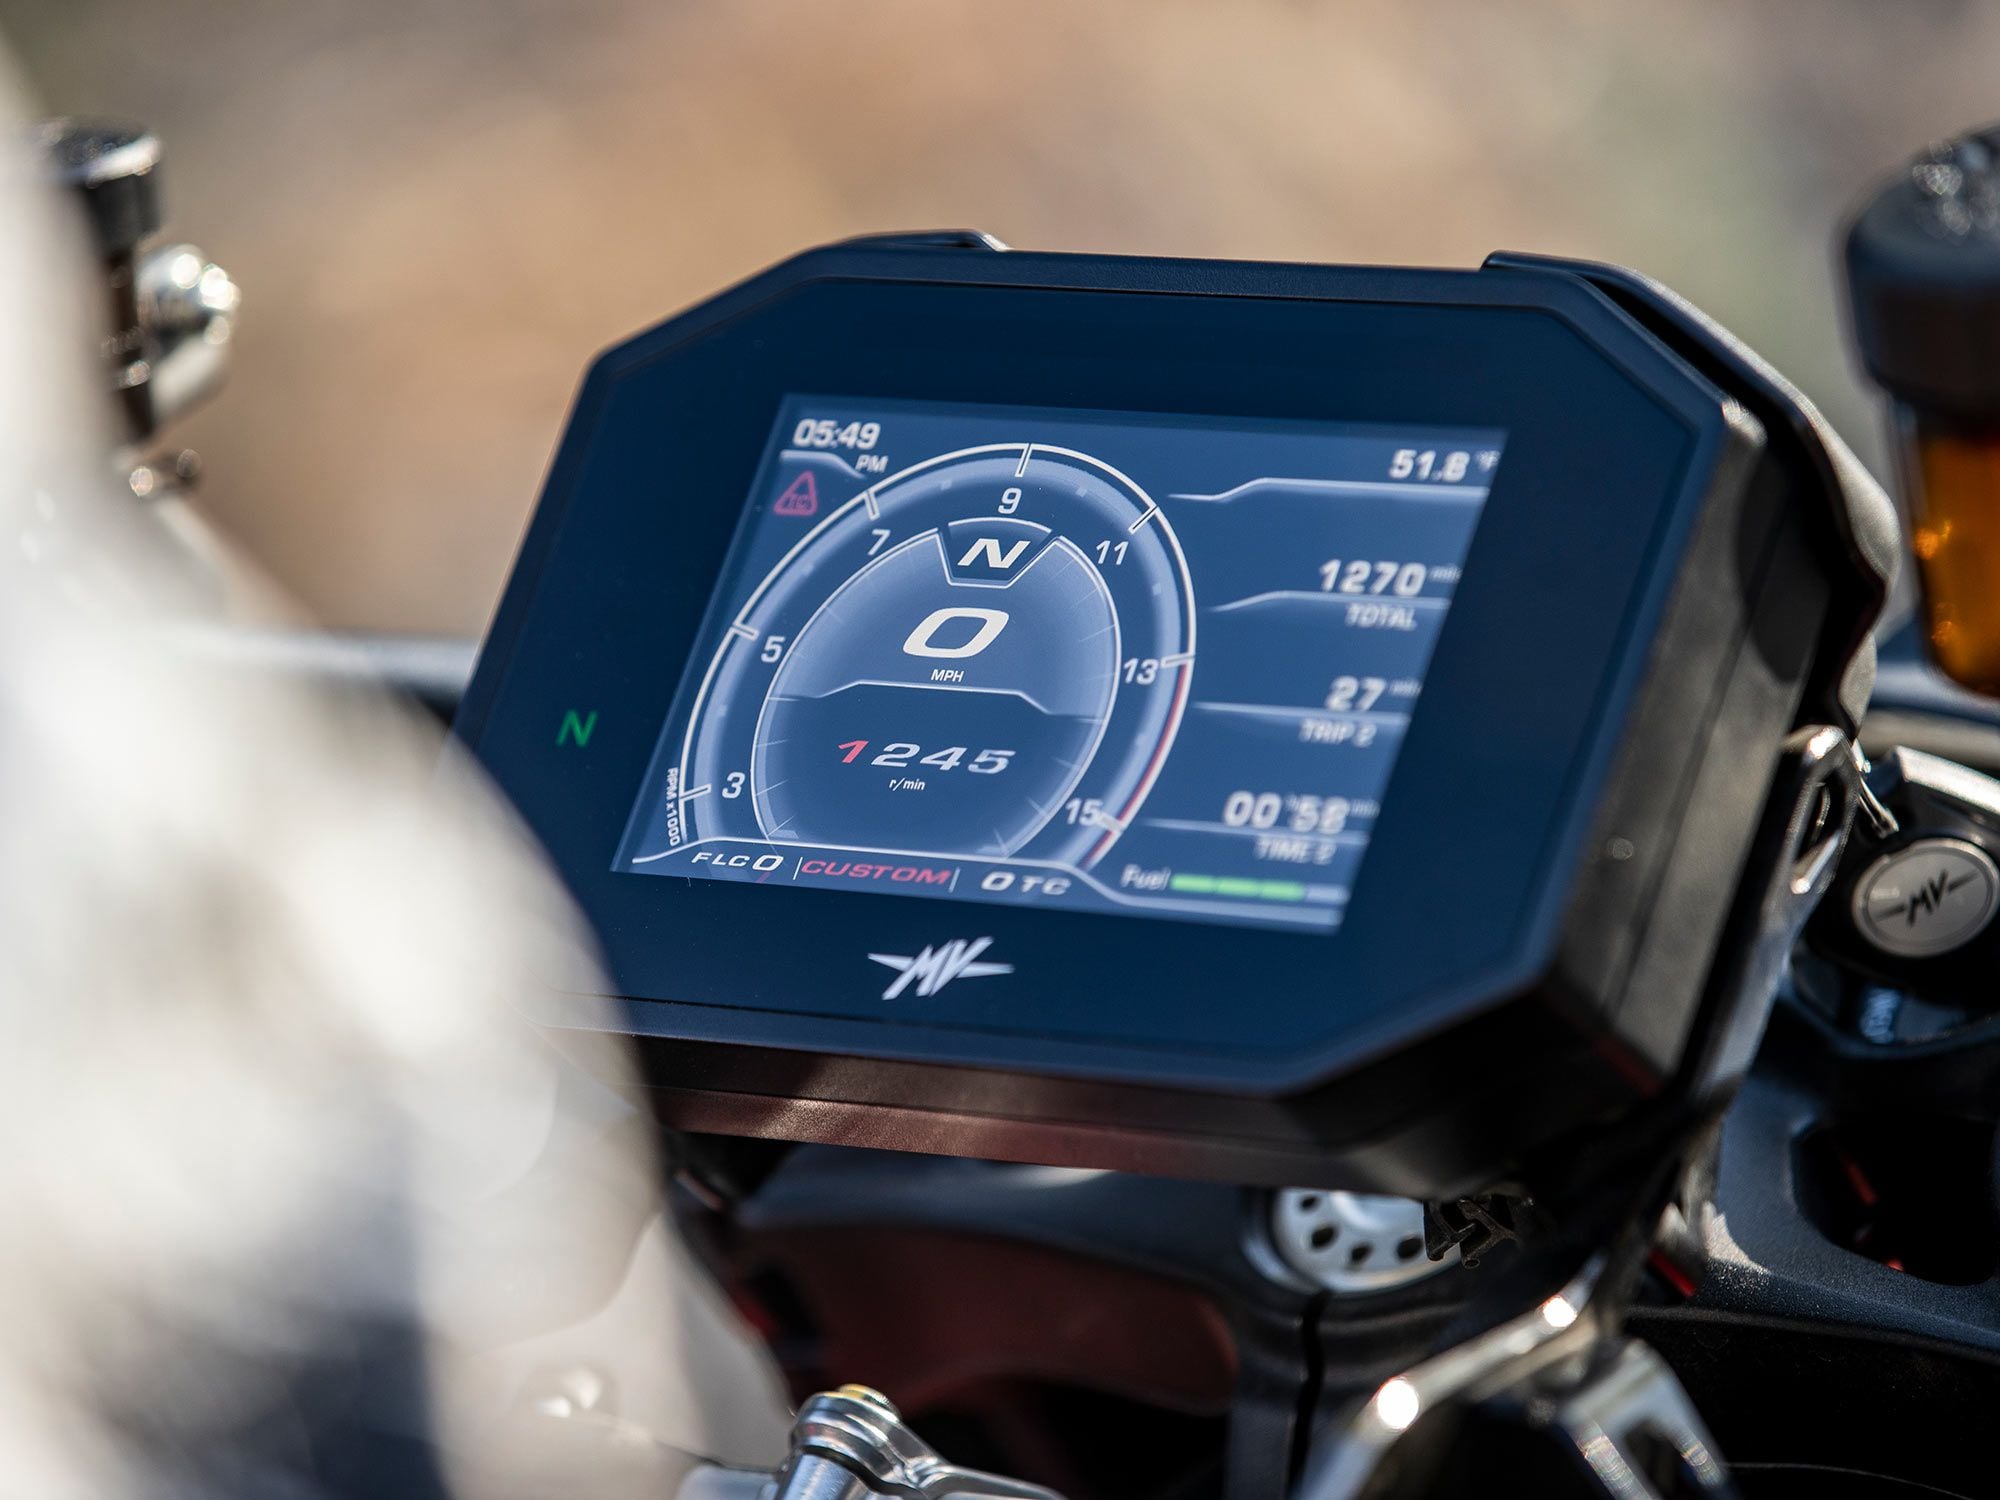 Much can be accomplished via the TFT screen including adjustment of the steering damper, Bluetooth connection, along with ABS and Traction Control fine-tuning.